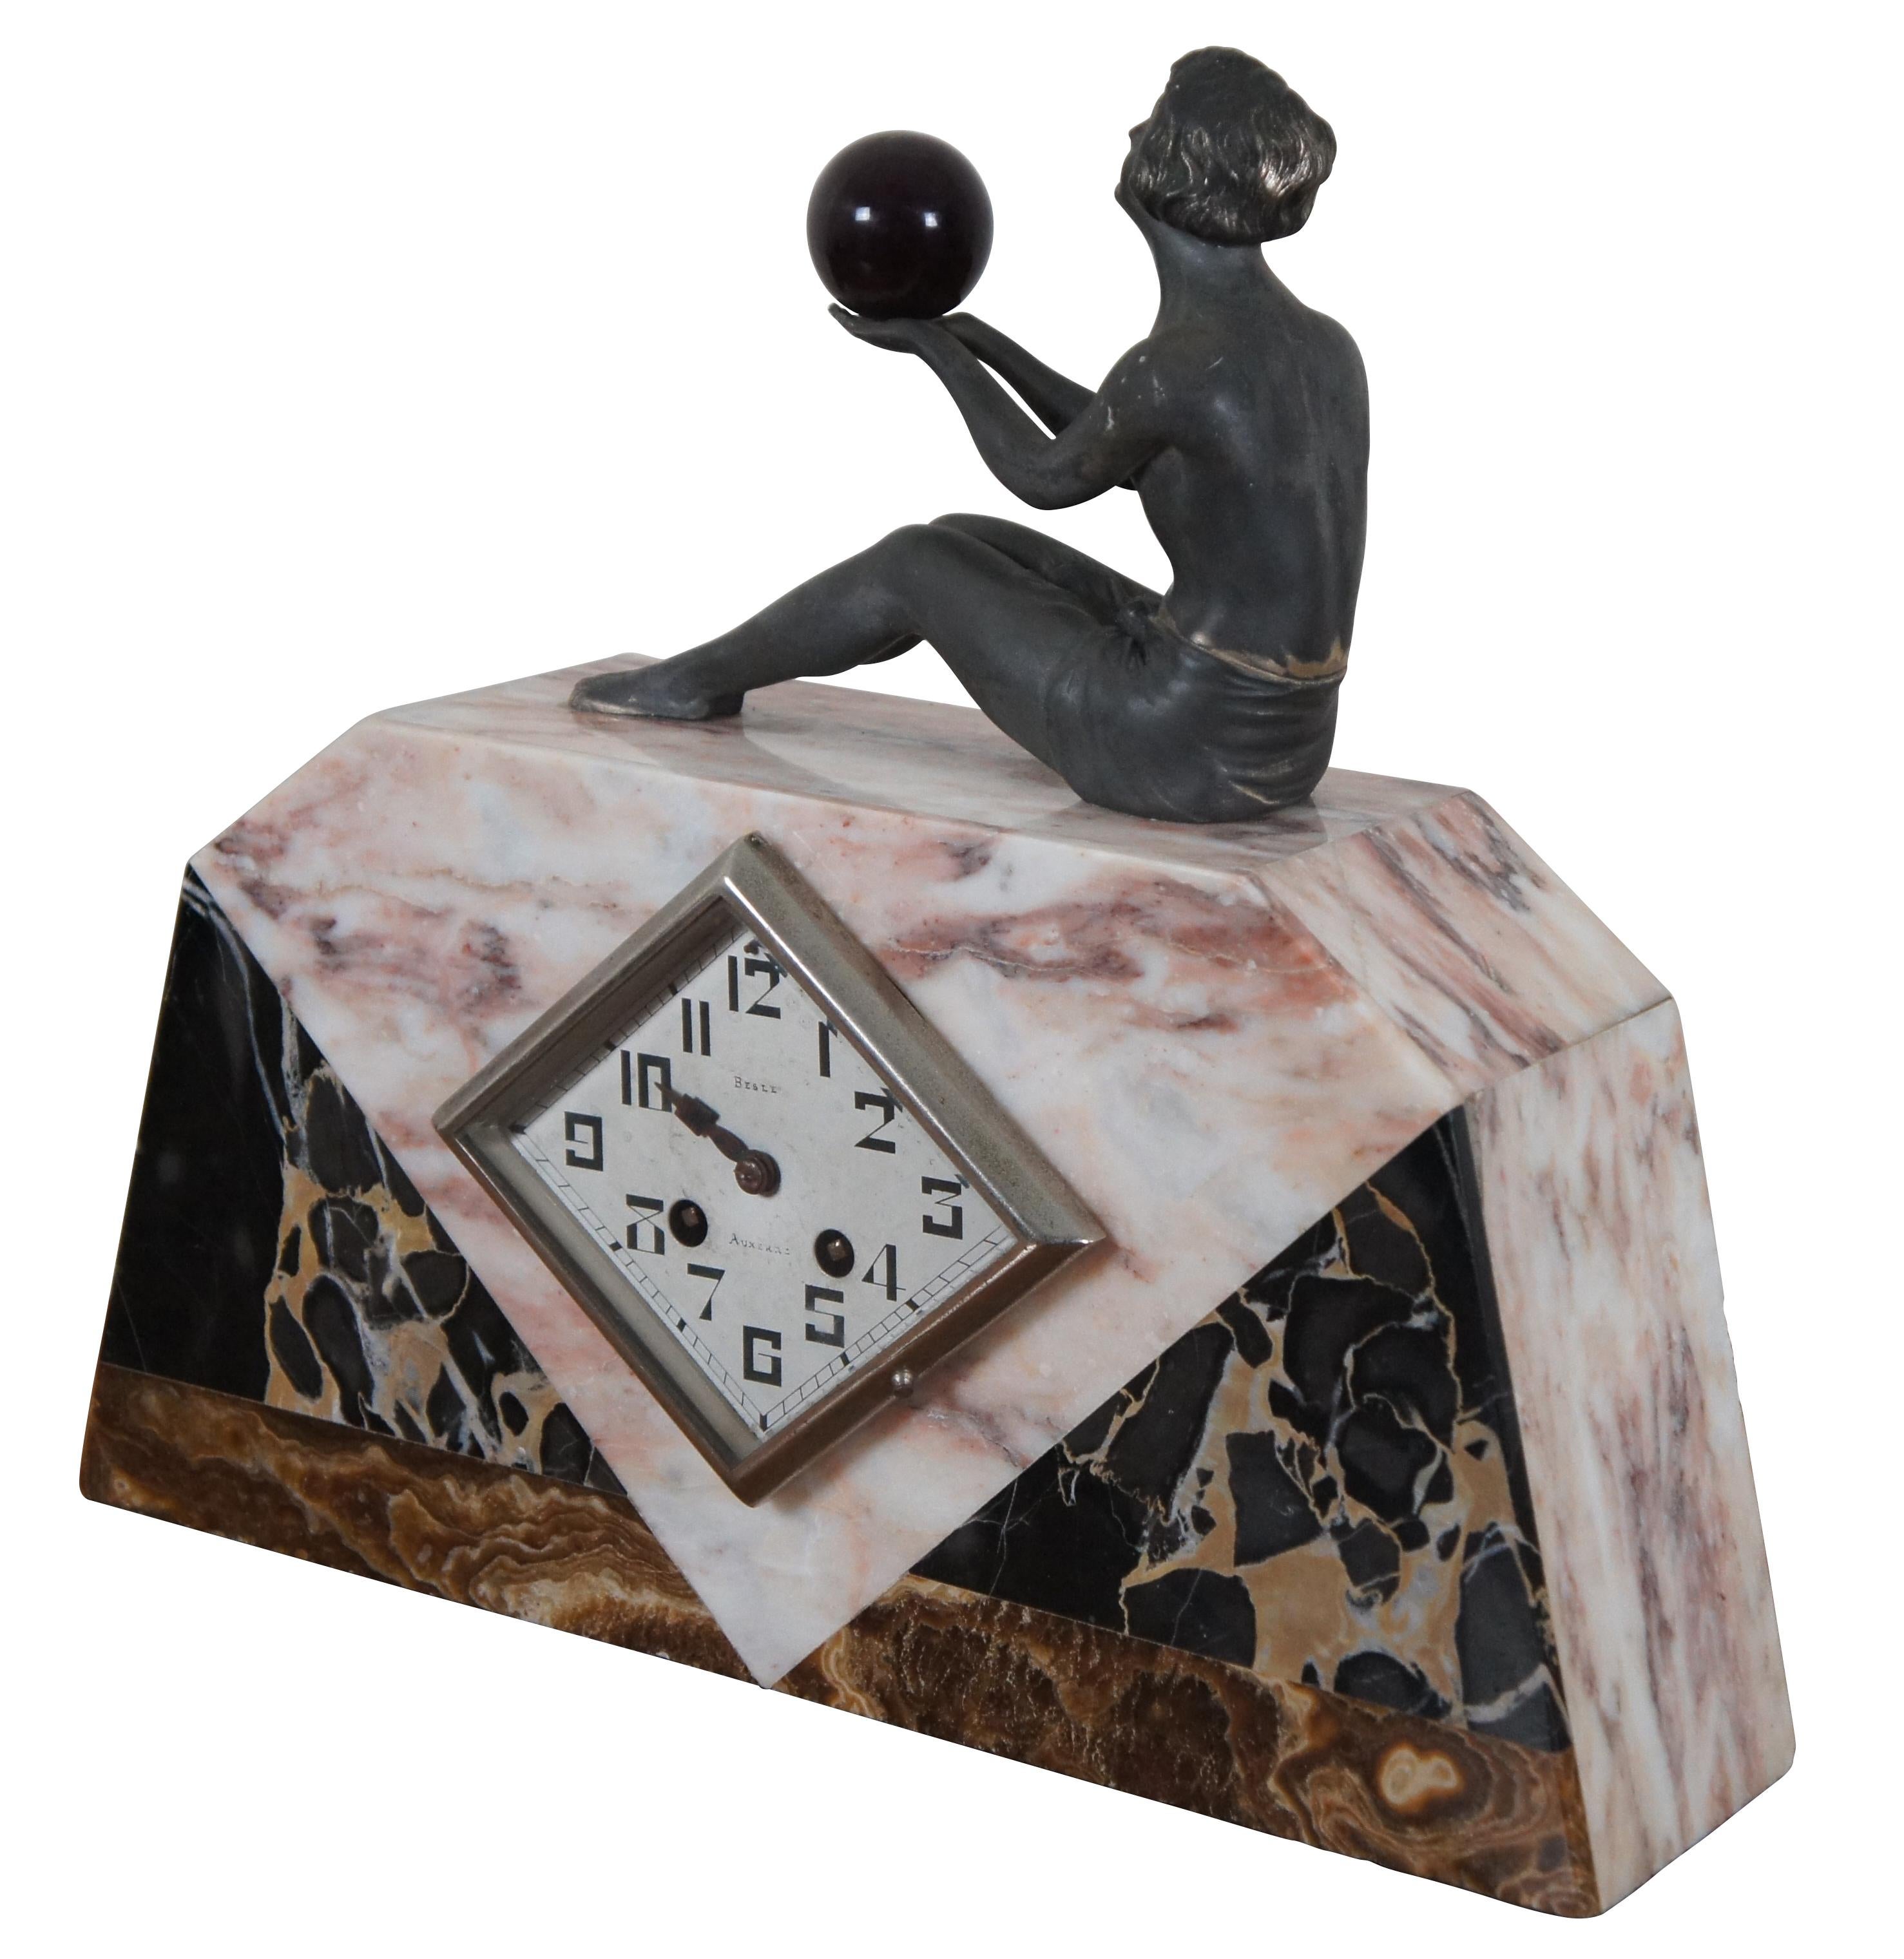 Antique circa 1920s Art Deco chiming mantel / desk clock by Besle Auxerre, crafted of several colors of marble with a diamond shaped face and topped with a seated bronze female figure holding a deep red orb. Works marked 153.